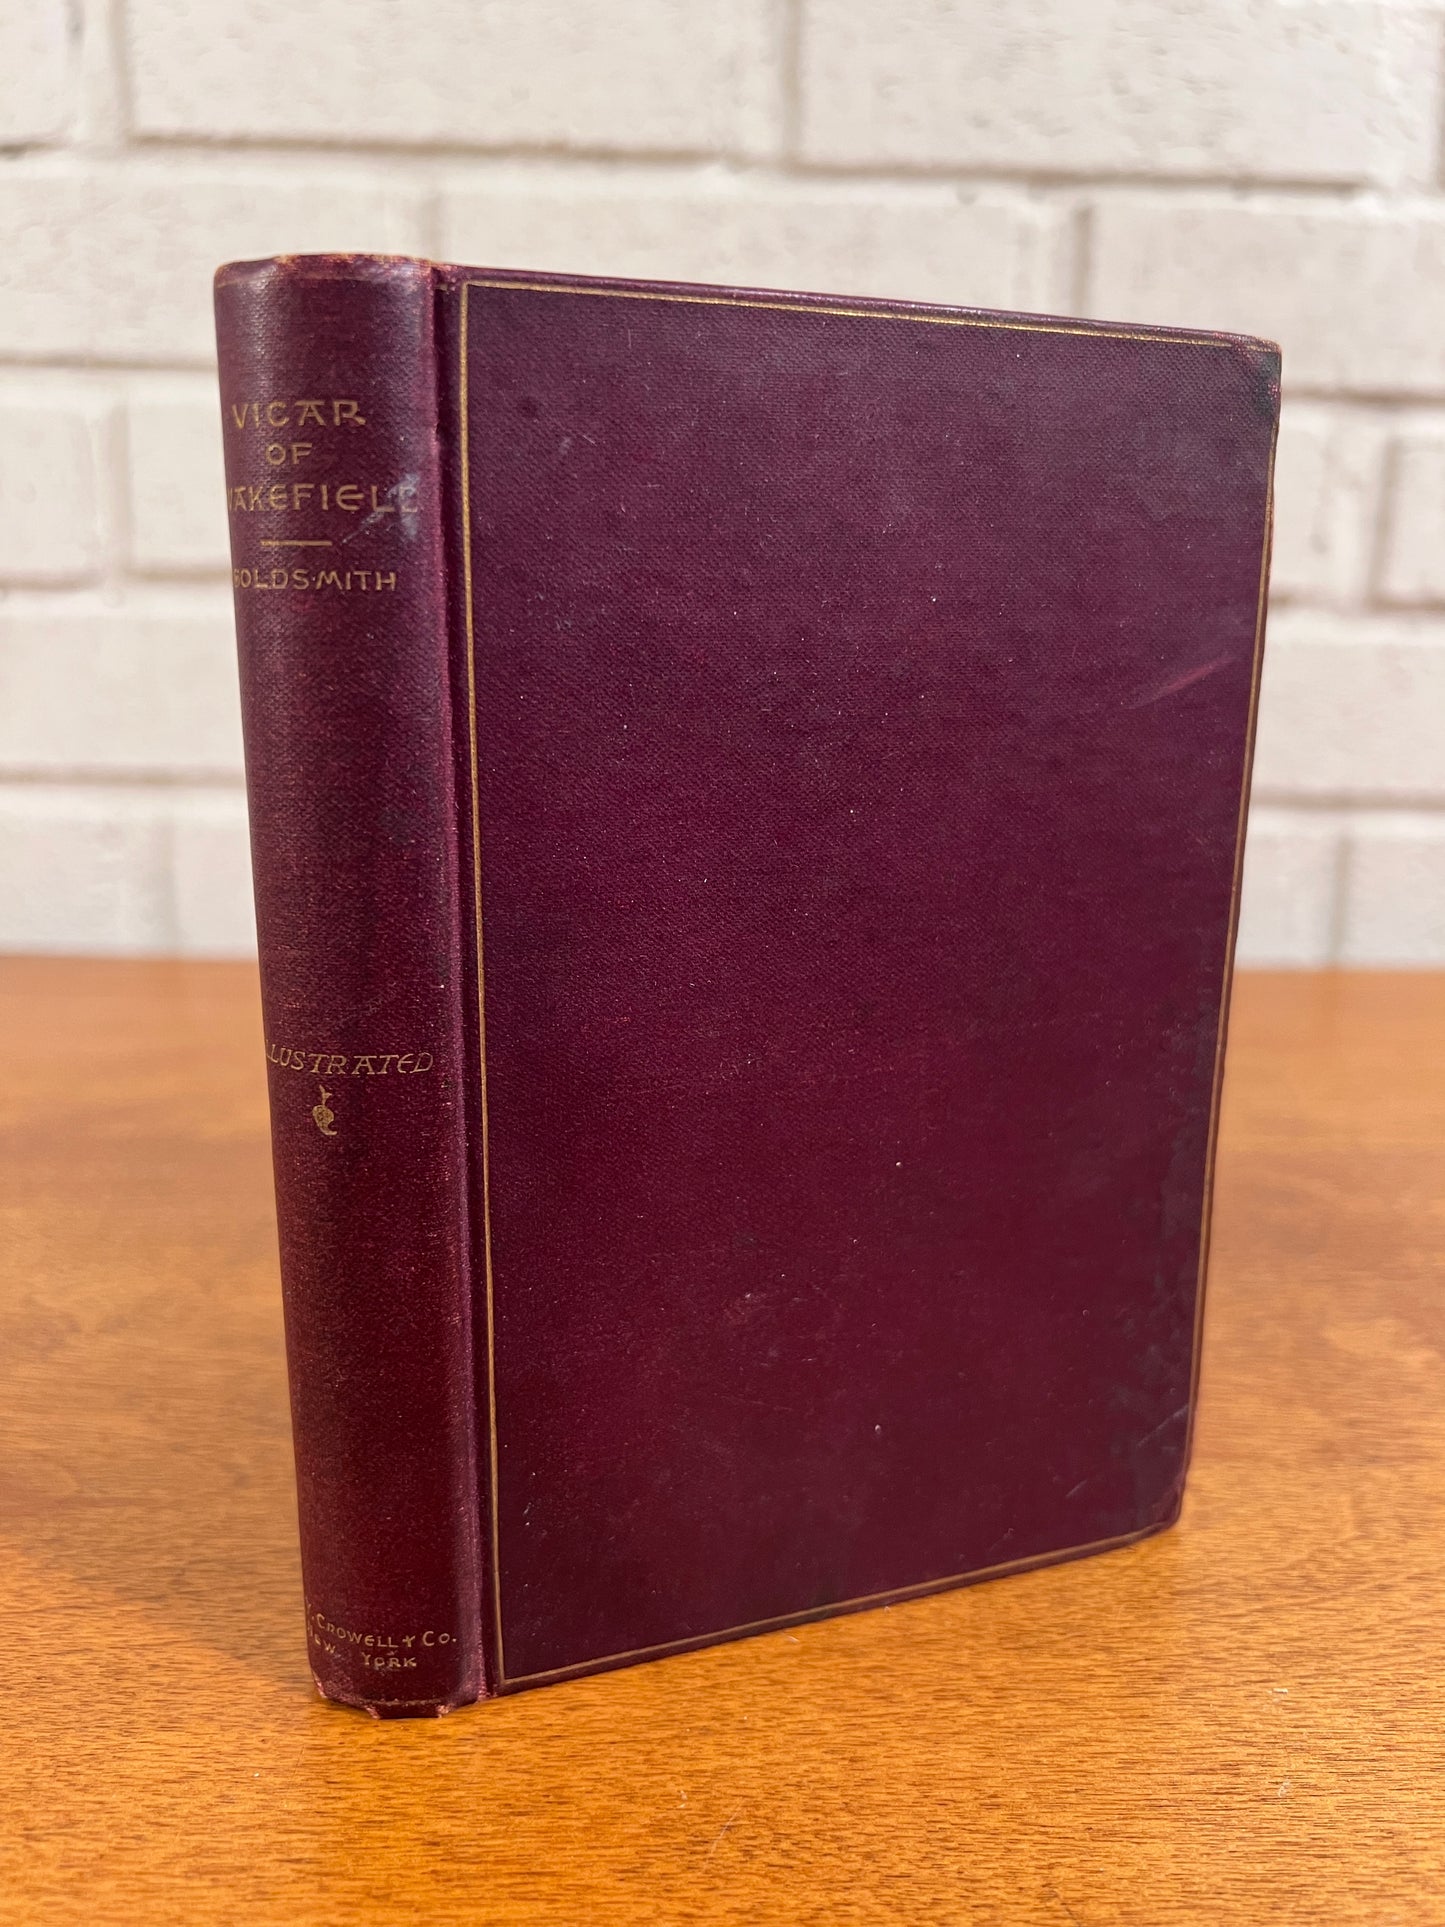 The Vicar of Wakefield by Oliver Goldsmith, 1892